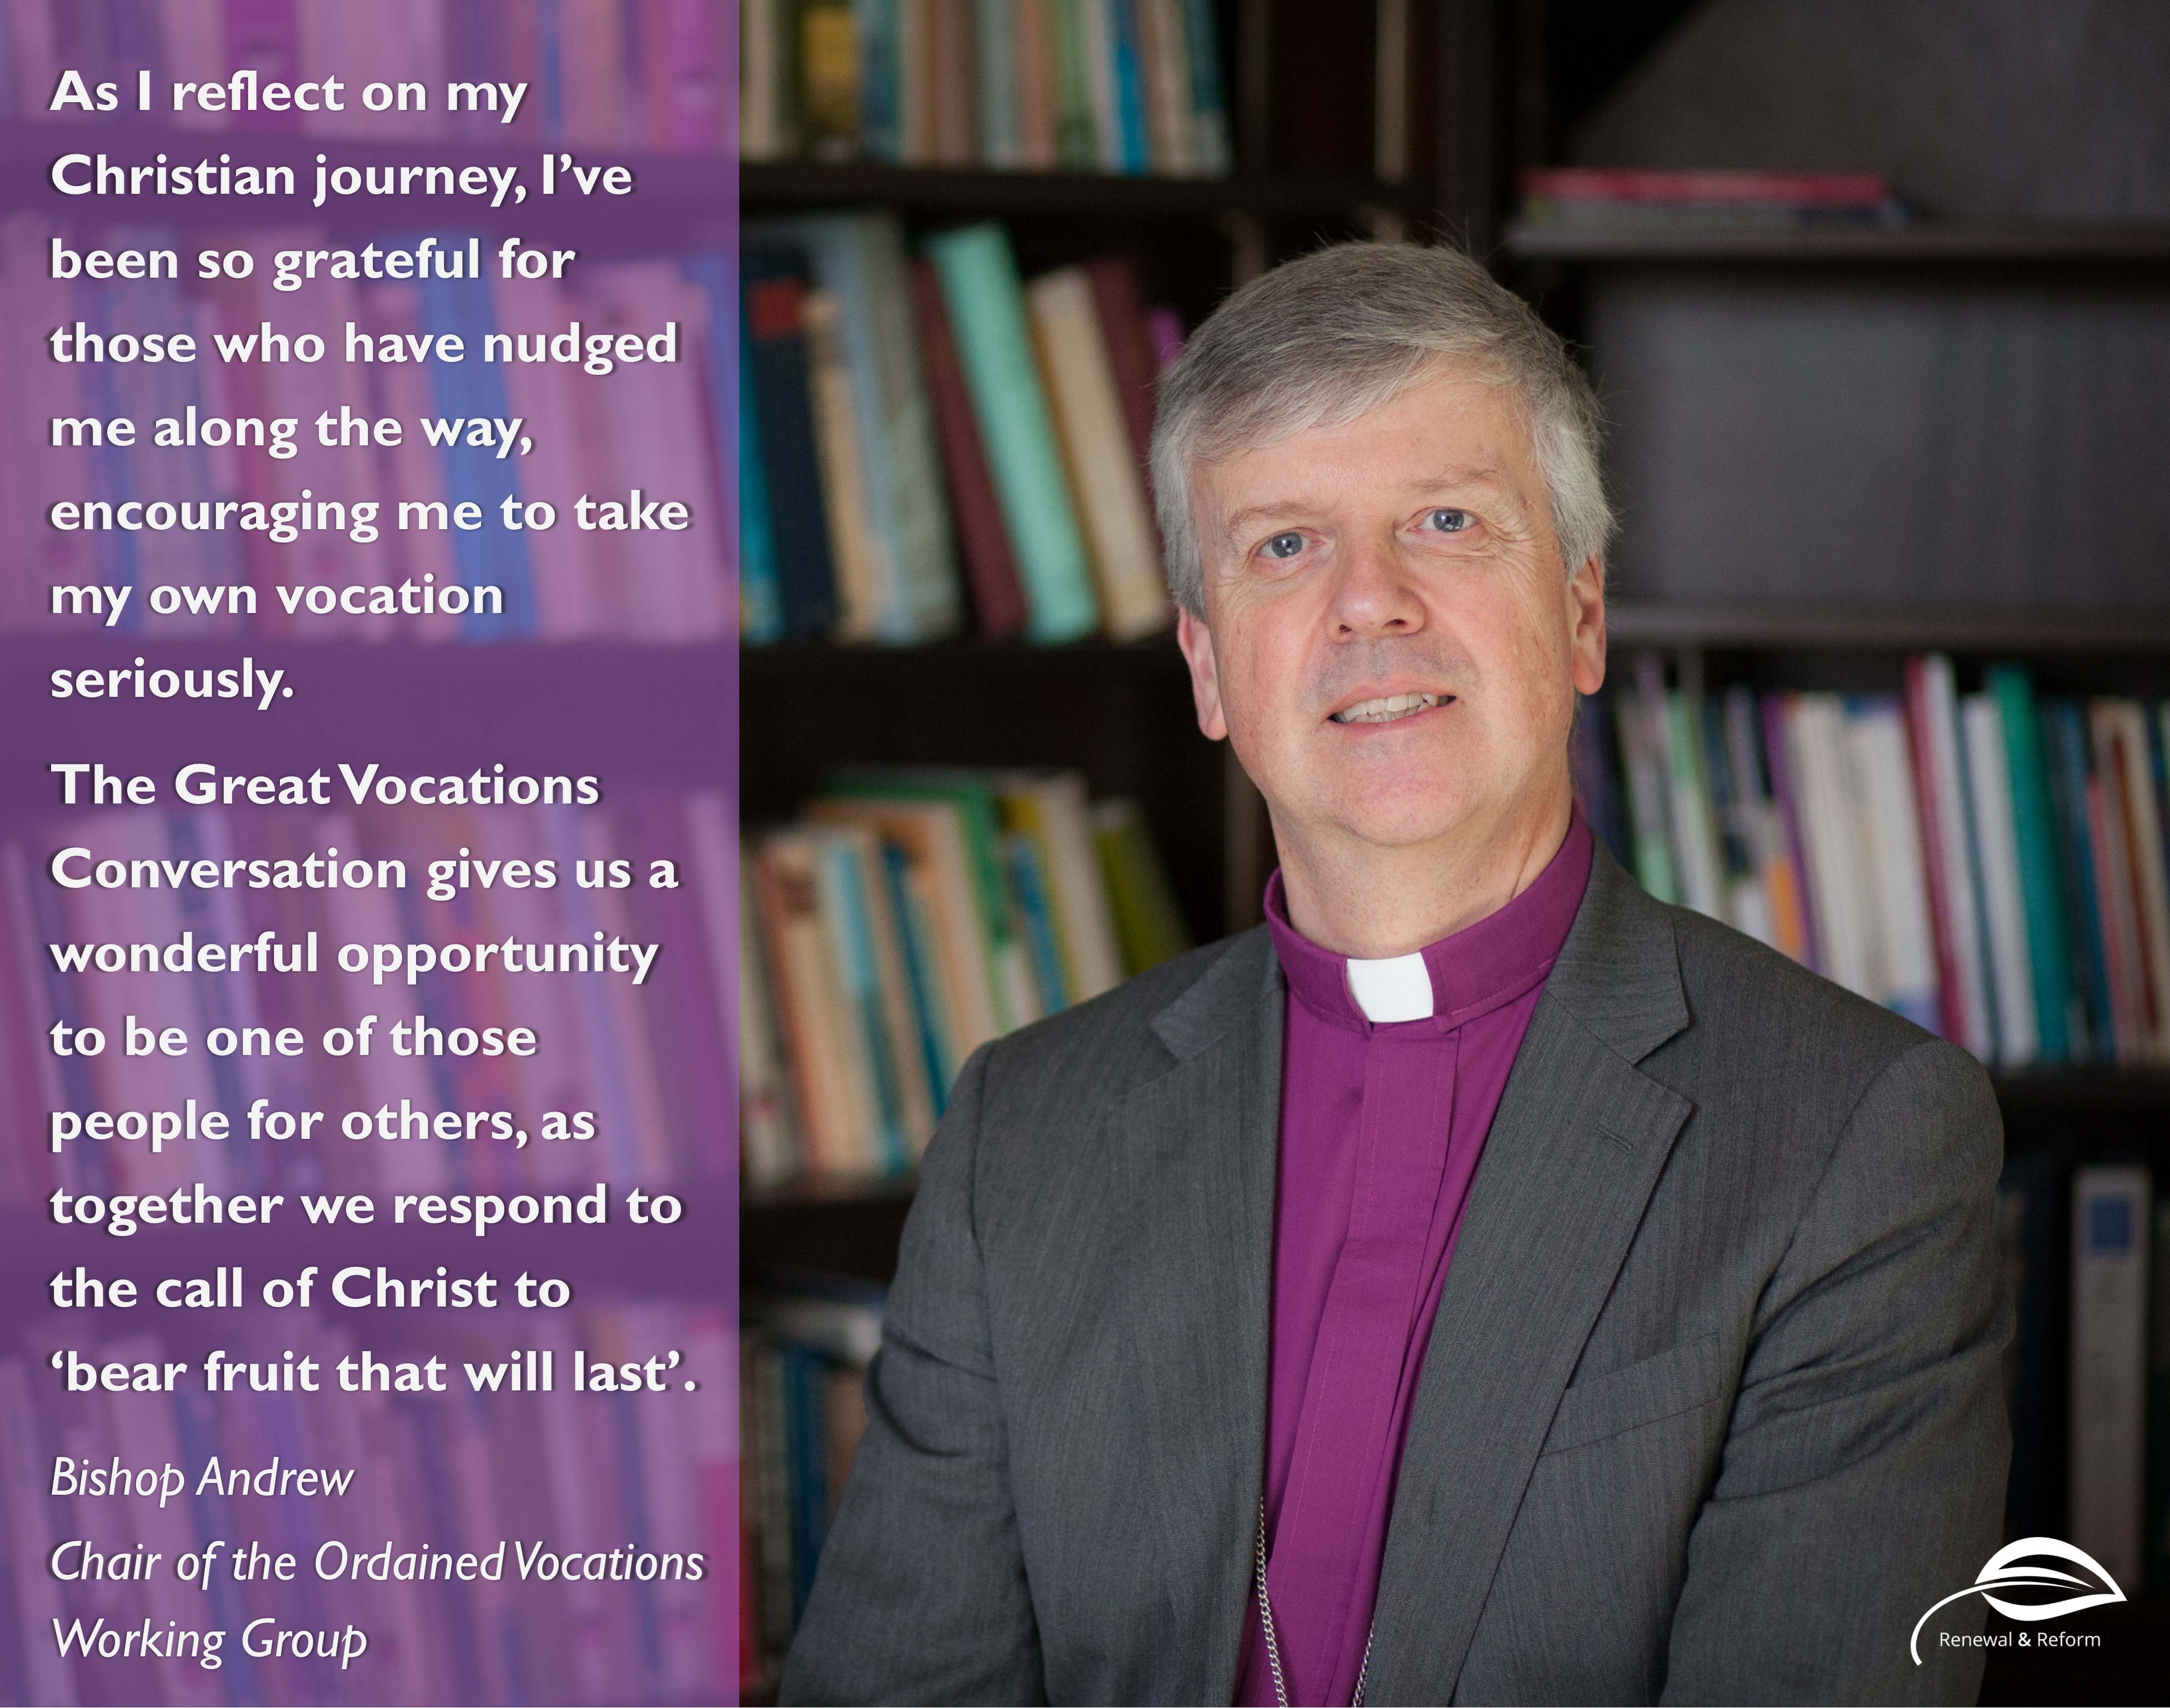 Bishop Andrew. As I reflect on my Christian journey, I've been so grateful for those who have nudged me along the way, encouraging me to take my own vocation seriously. The Great Vocation Conversation is a wonderful opportunity to be one of those people for others, as together we respond to the call of Christ to bear fruit that will last.